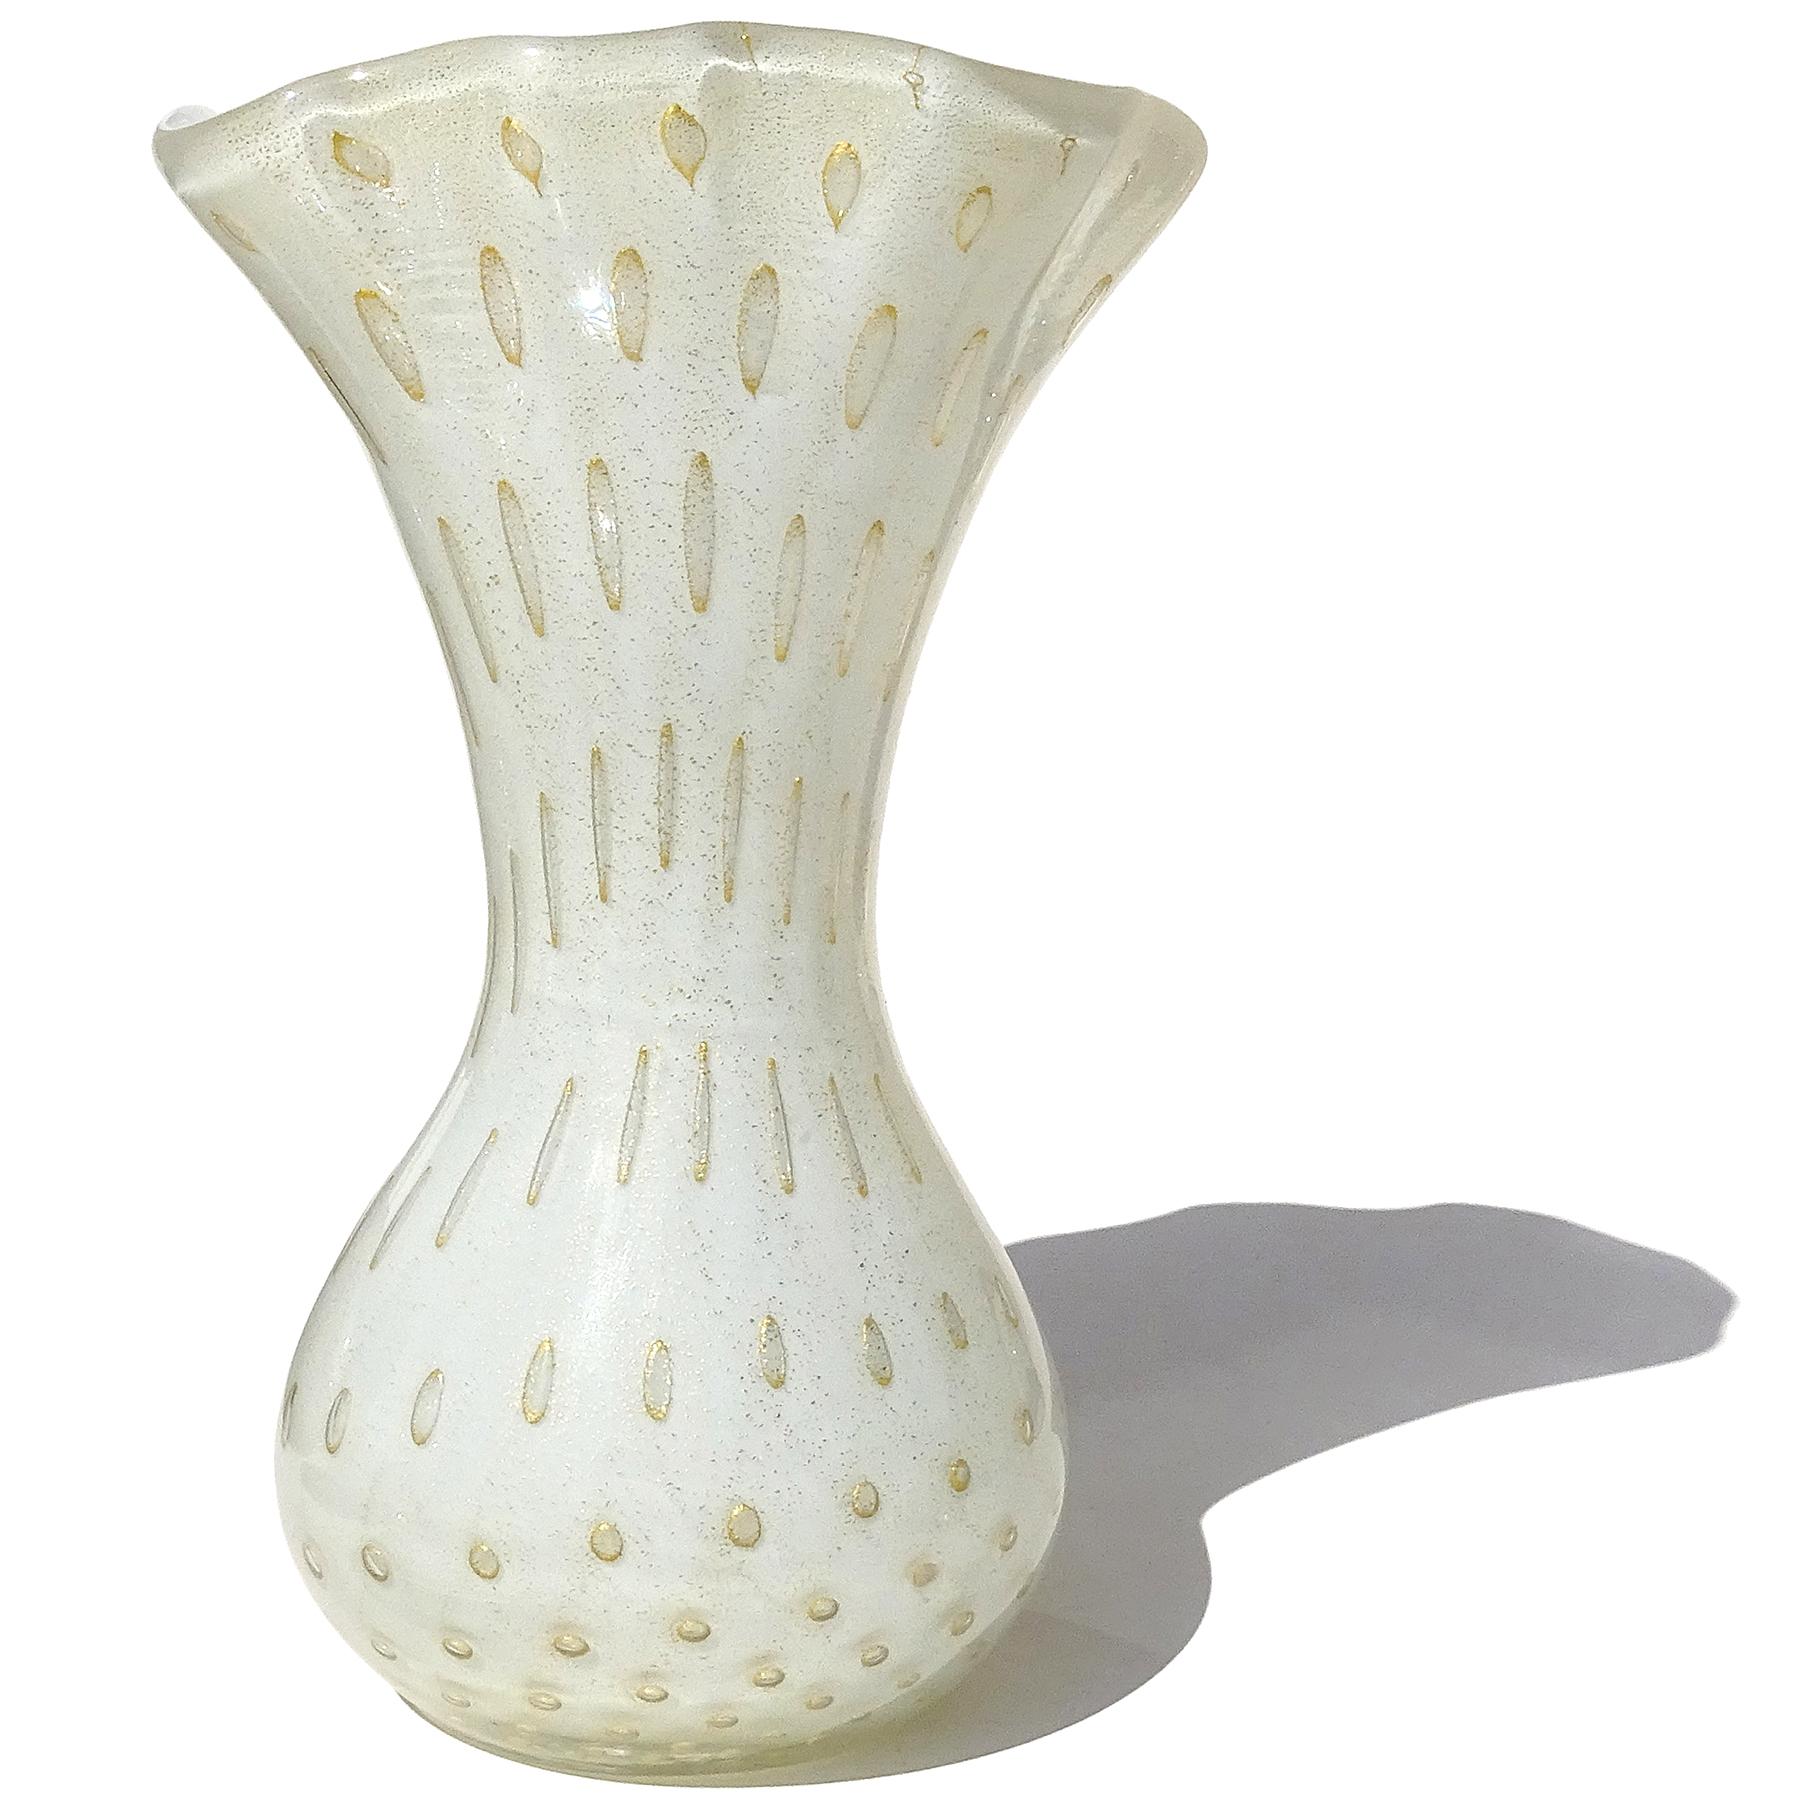 Beautiful vintage Murano hand blown white, controlled bubbles and gold flecks Italian art glass fan shaped rim flower vase. Attributed to designer Alfredo Barbini, circa 1950-60s. The vase is made with a 